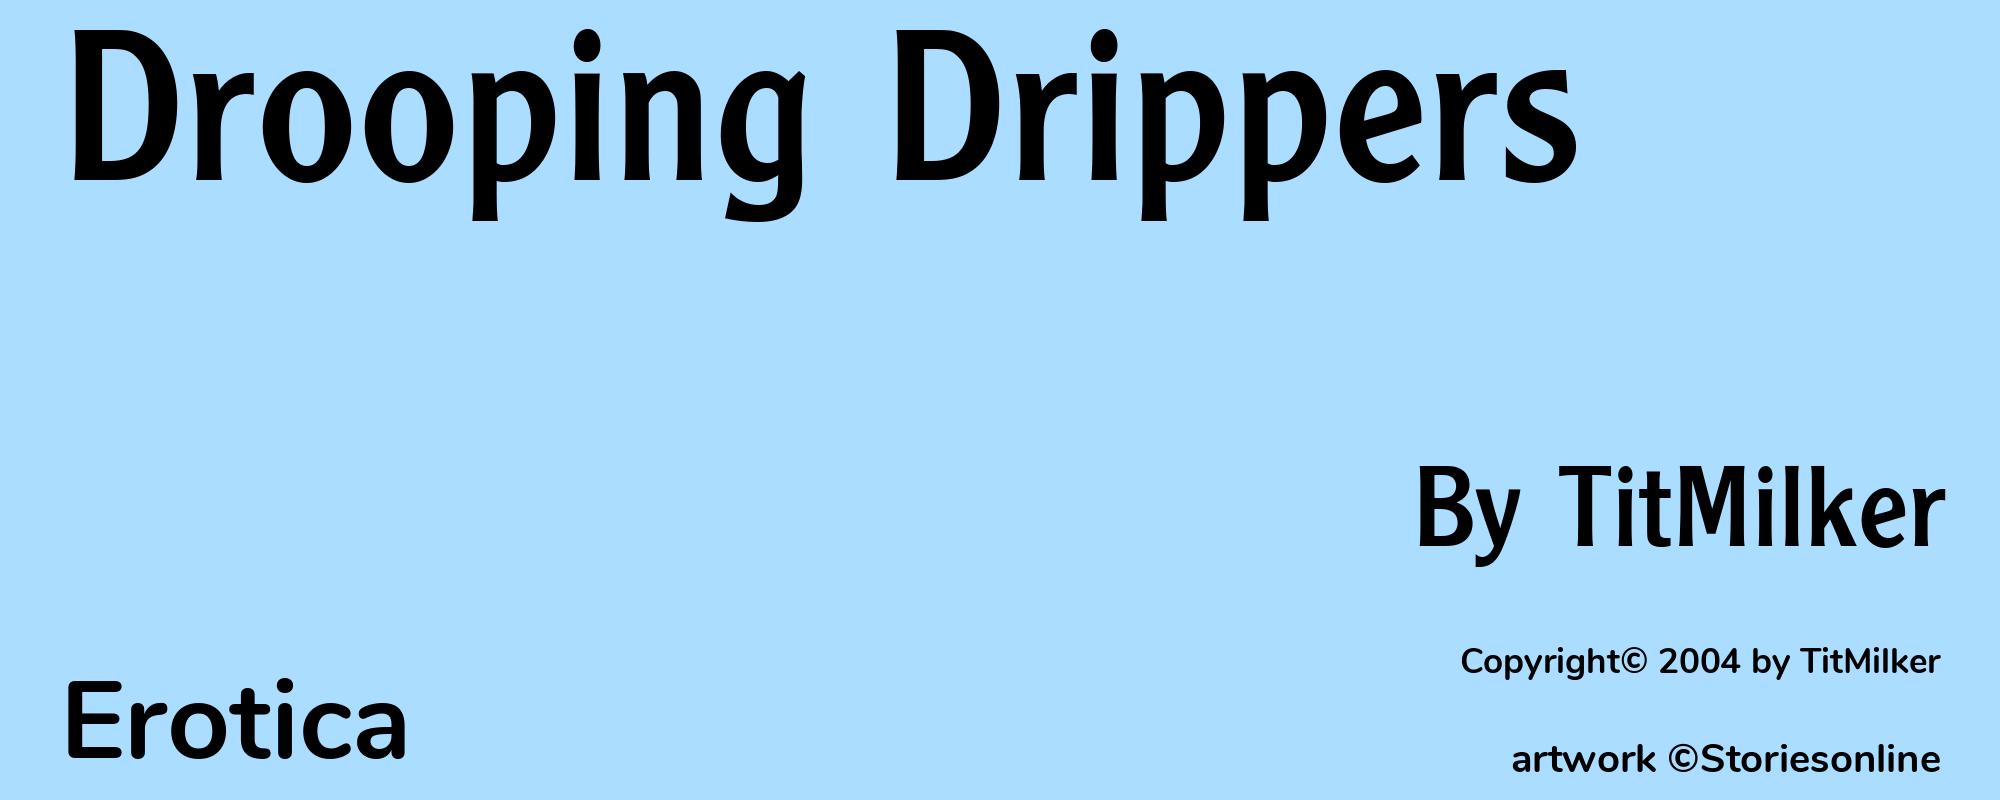 Drooping Drippers - Cover